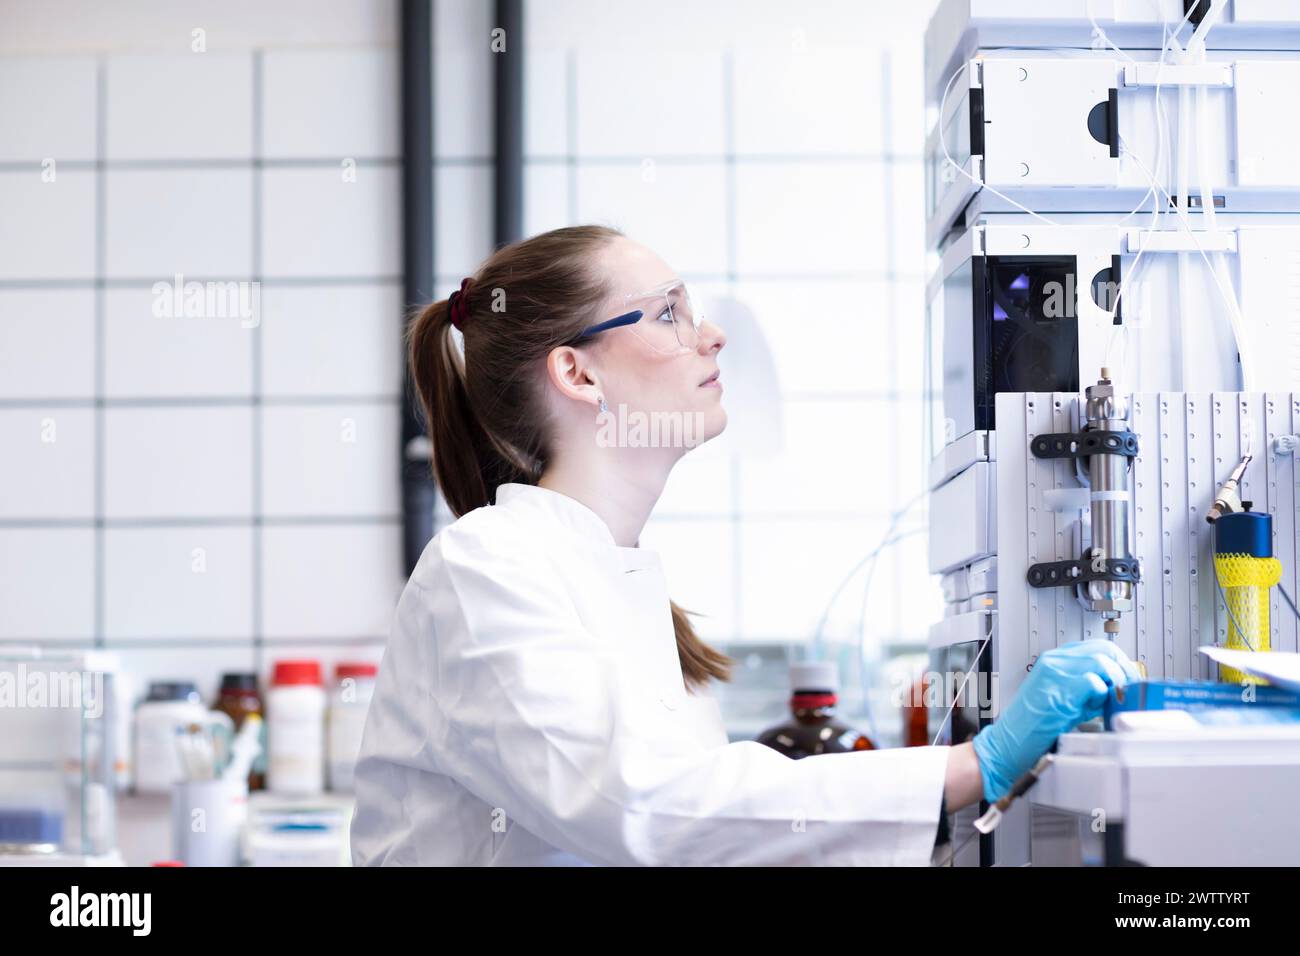 Scientist conducting research in a laboratory Stock Photo